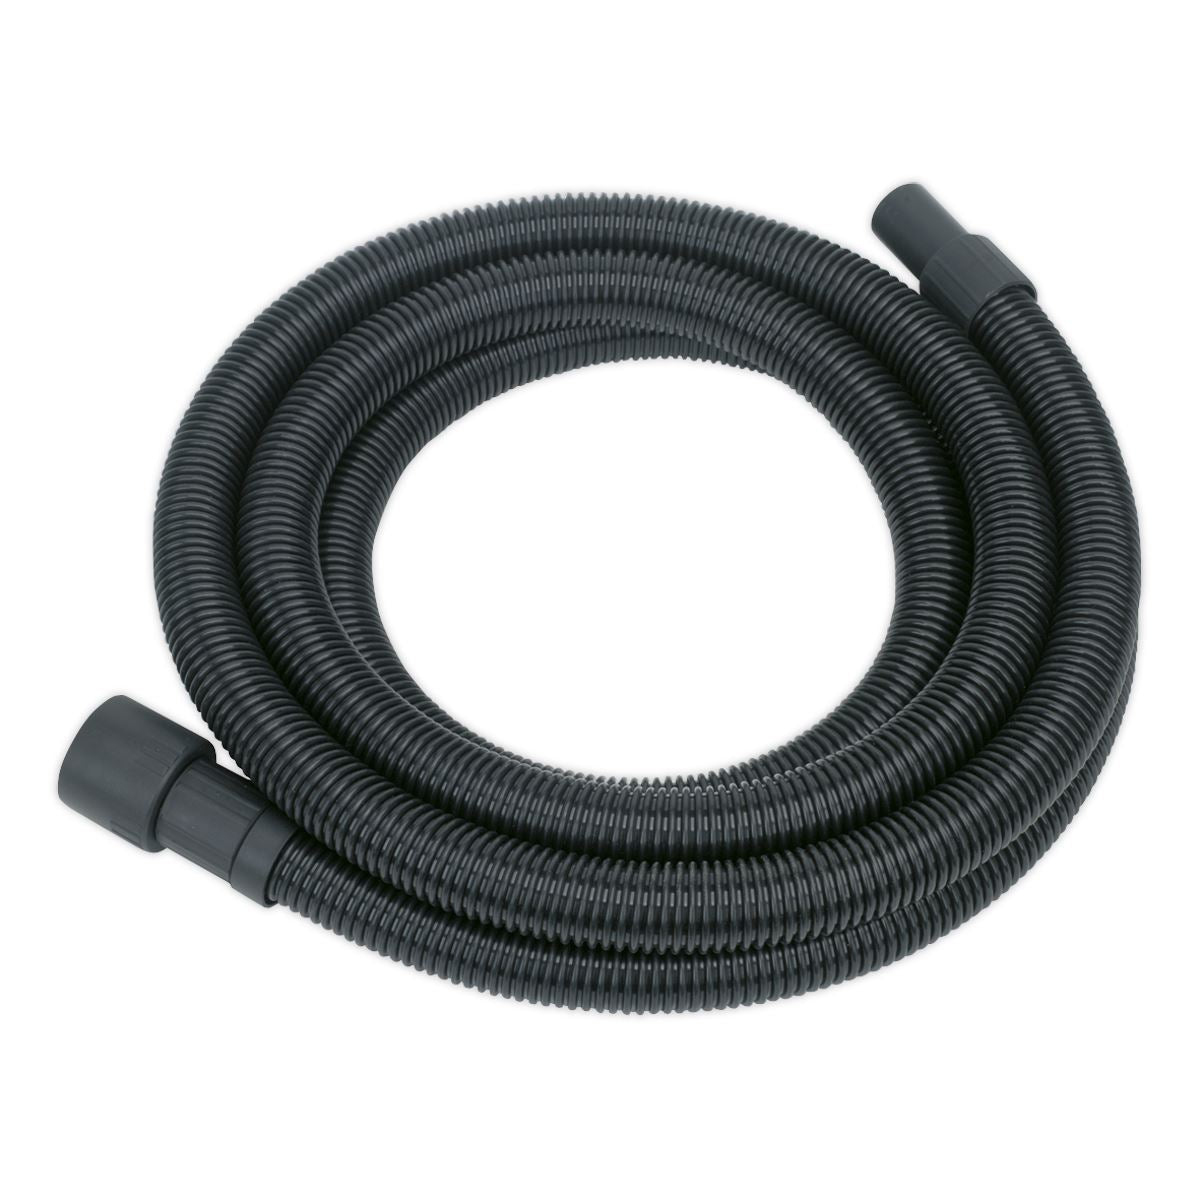 Sealey Vacuum Hose 5m Extension Cleaning Cleaner Black Appliance